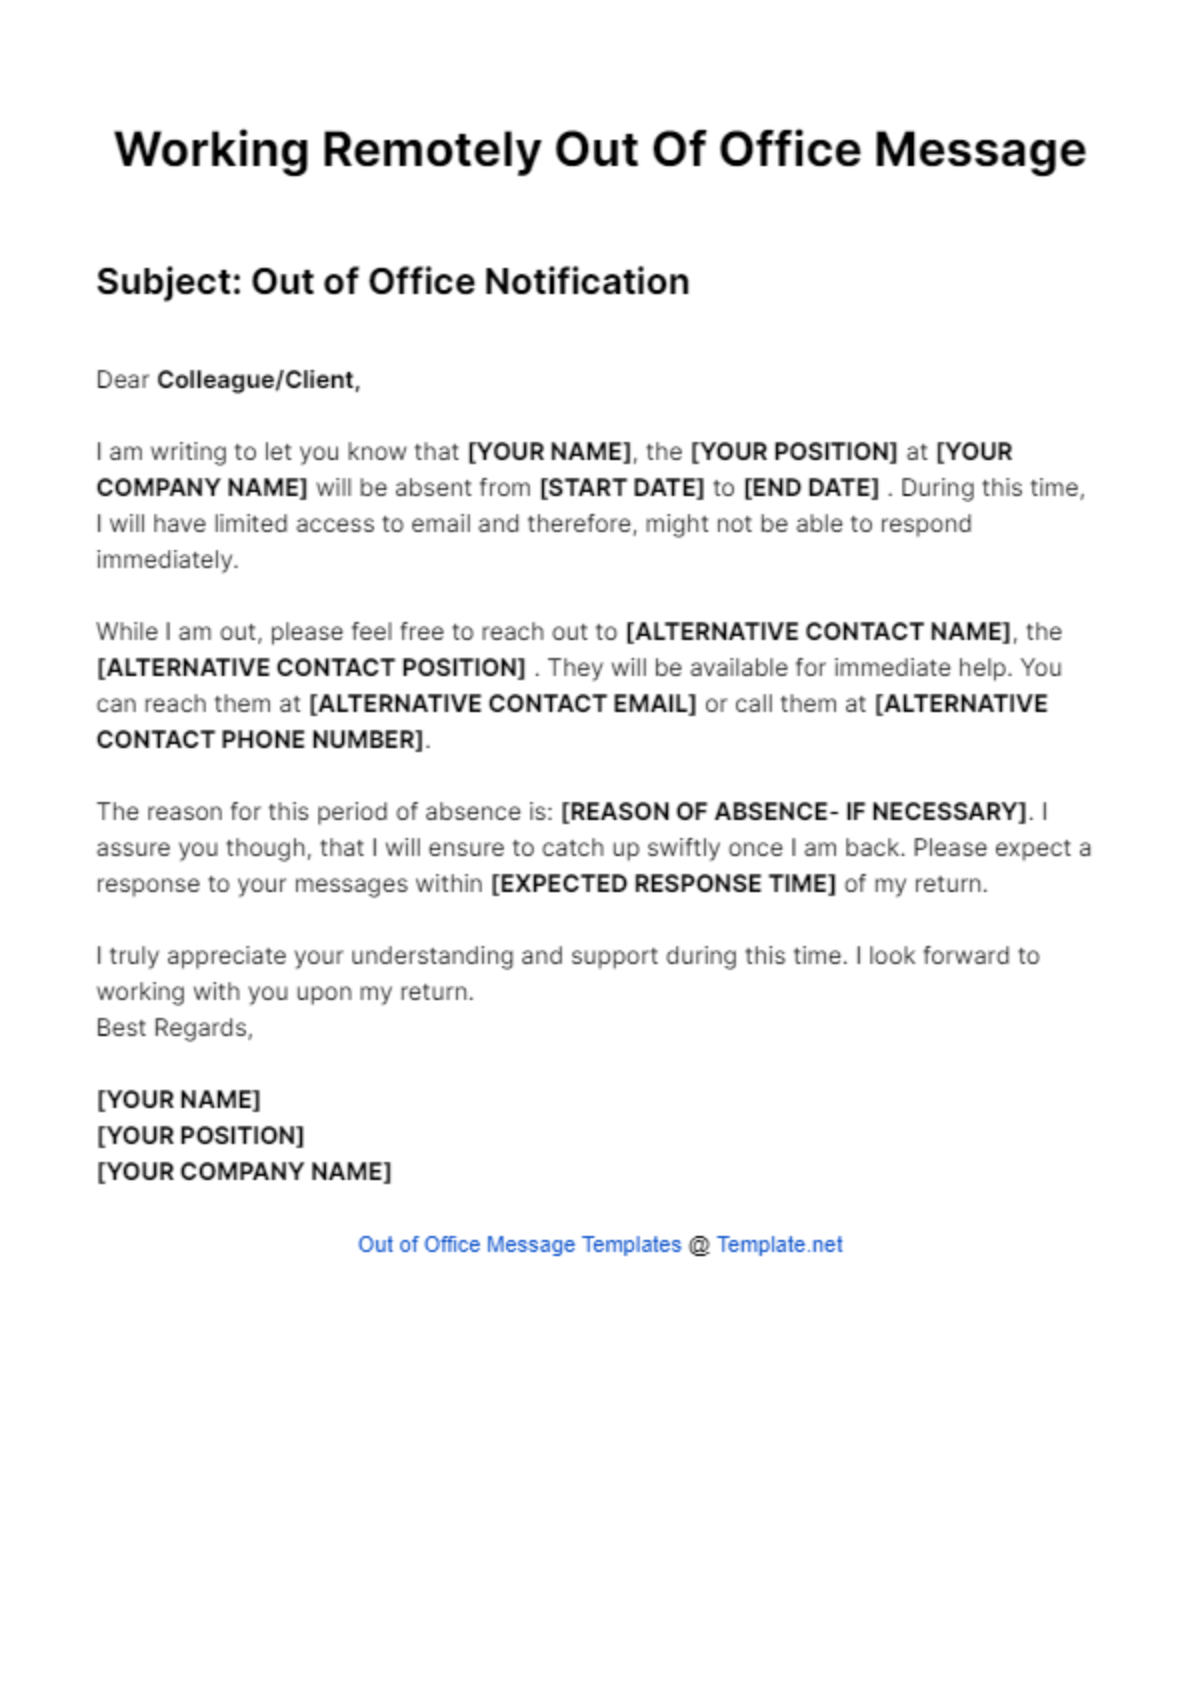 Free Working Remotely Out Of Office Message Template